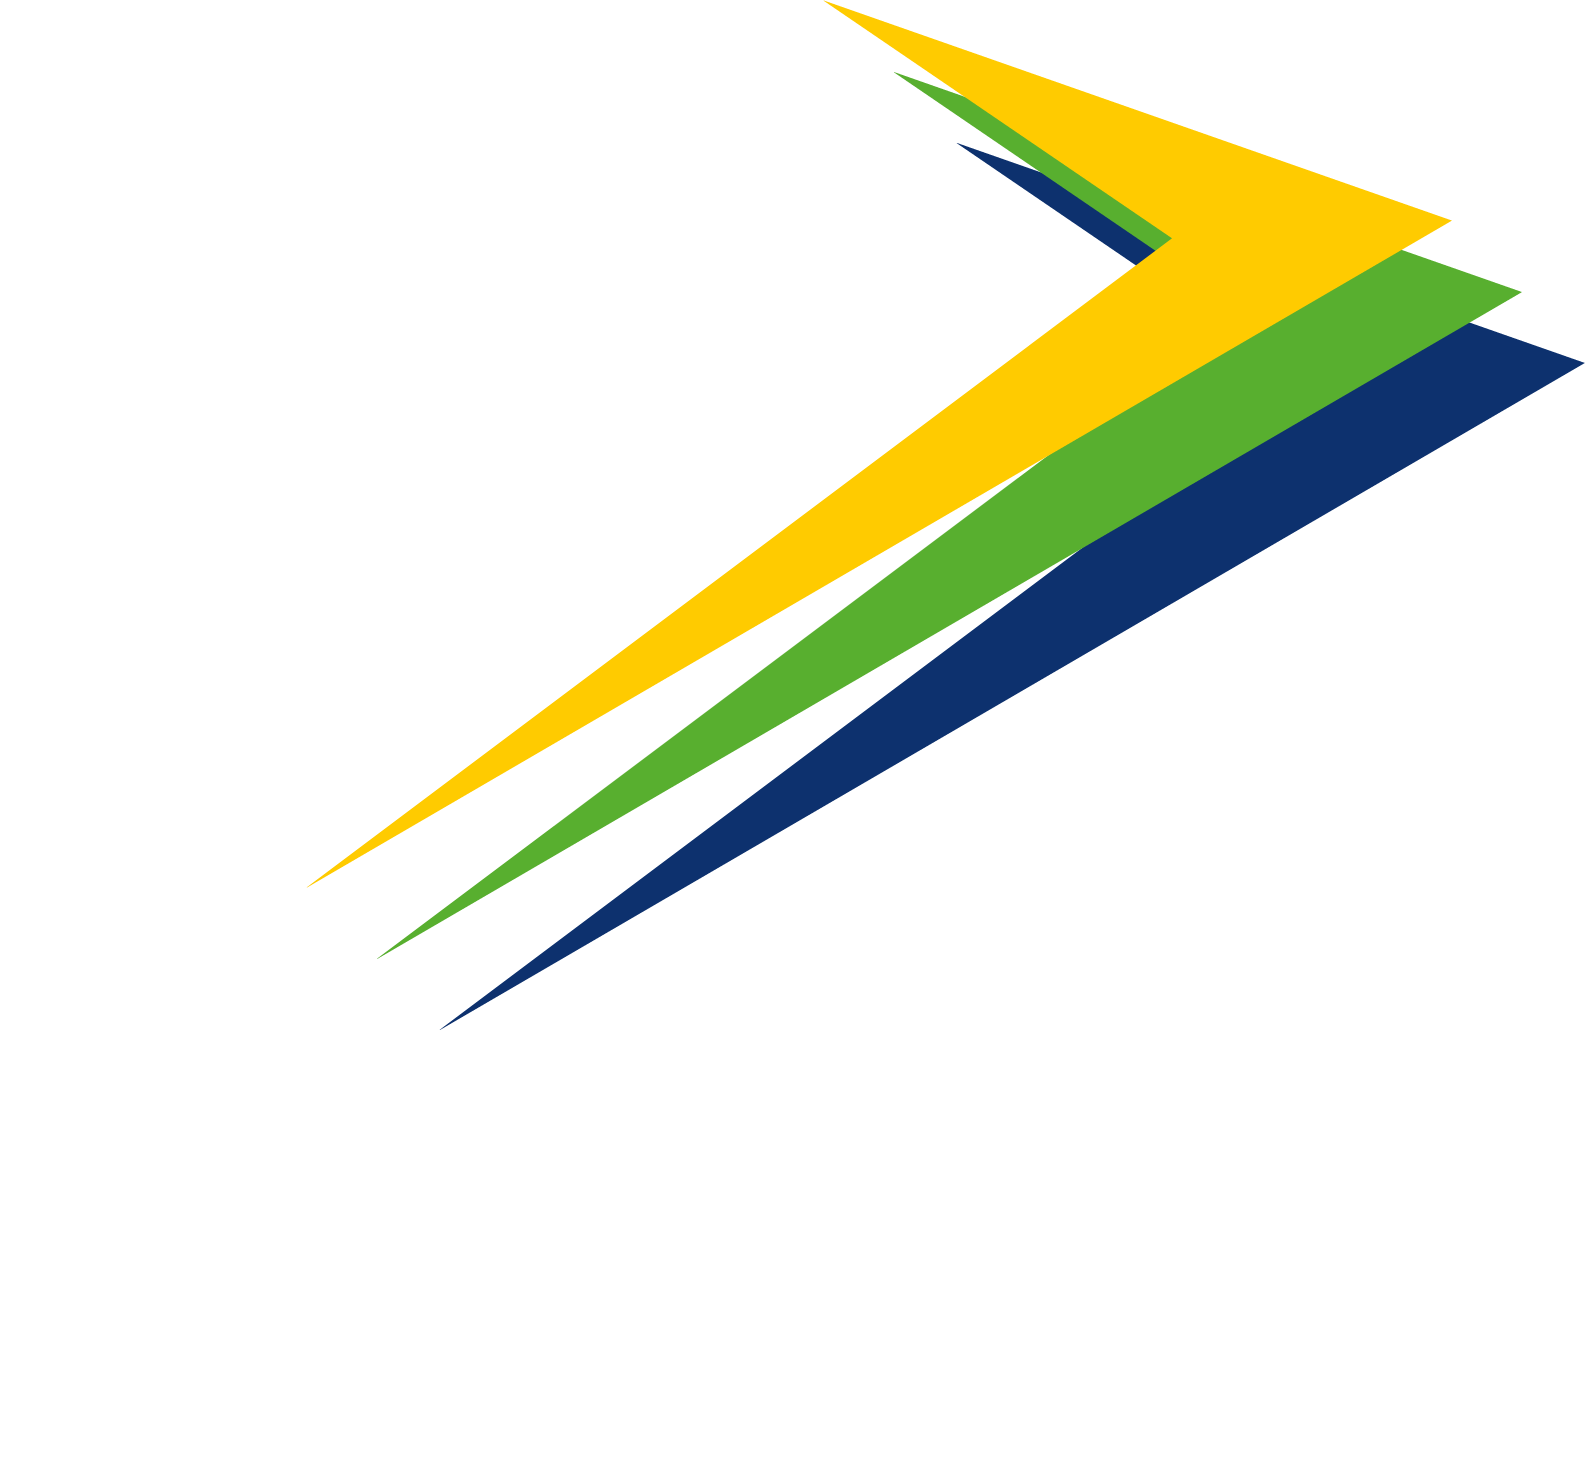 G&S Engineering Services